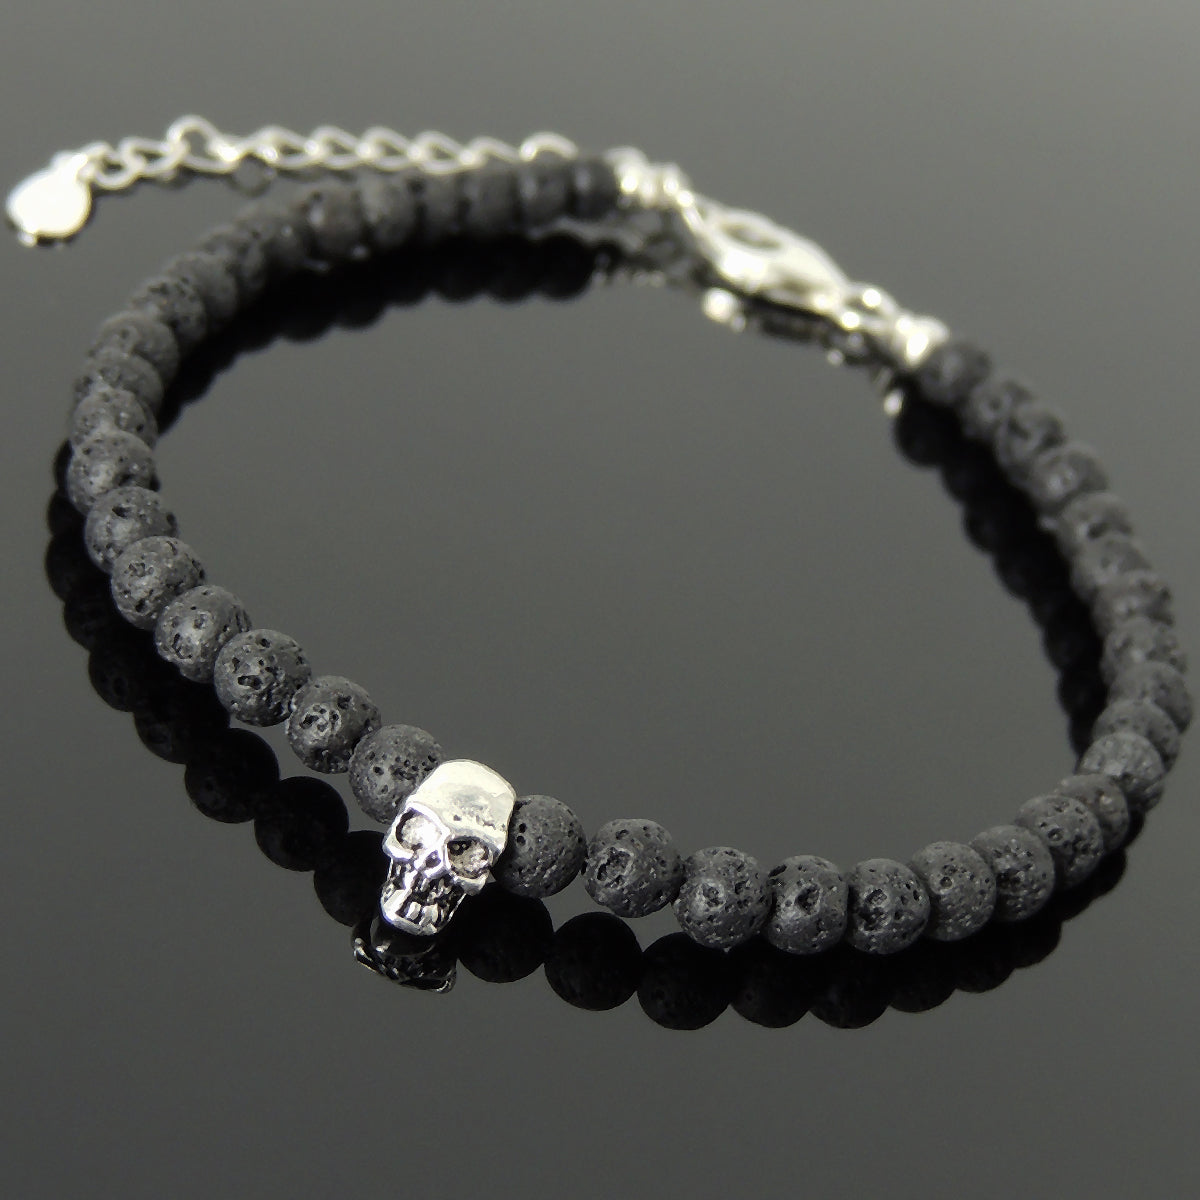 4mm Lava Rock Healing Stone Bracelet with S925 Sterling Silver Skull Protection Bead, Chain, & Clasp - Handmade by Gem & Silver BR1329